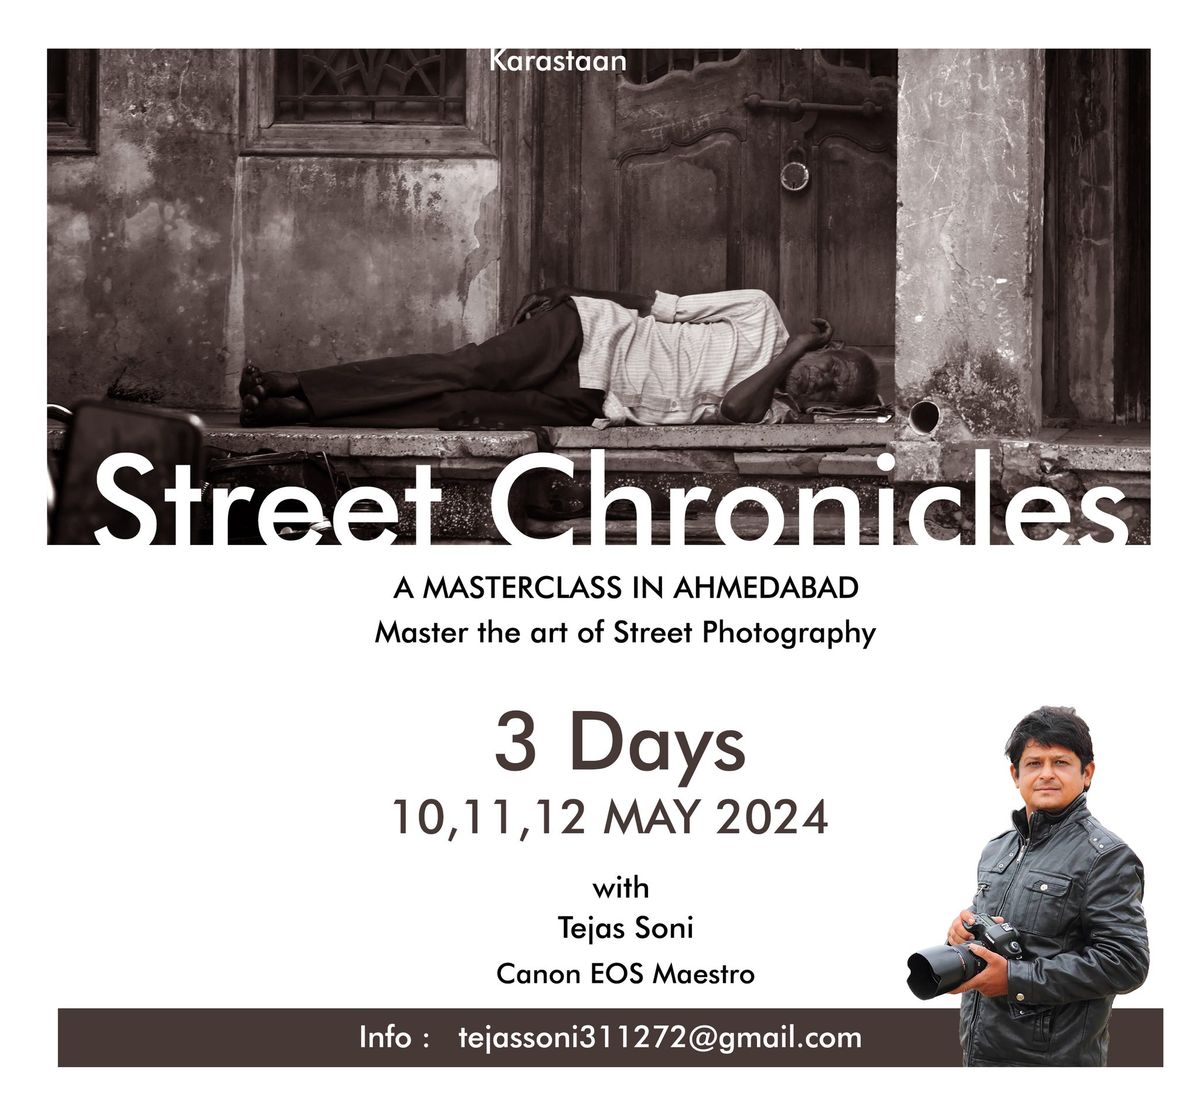 Street chronicles -A masterclass in Ahmedabad